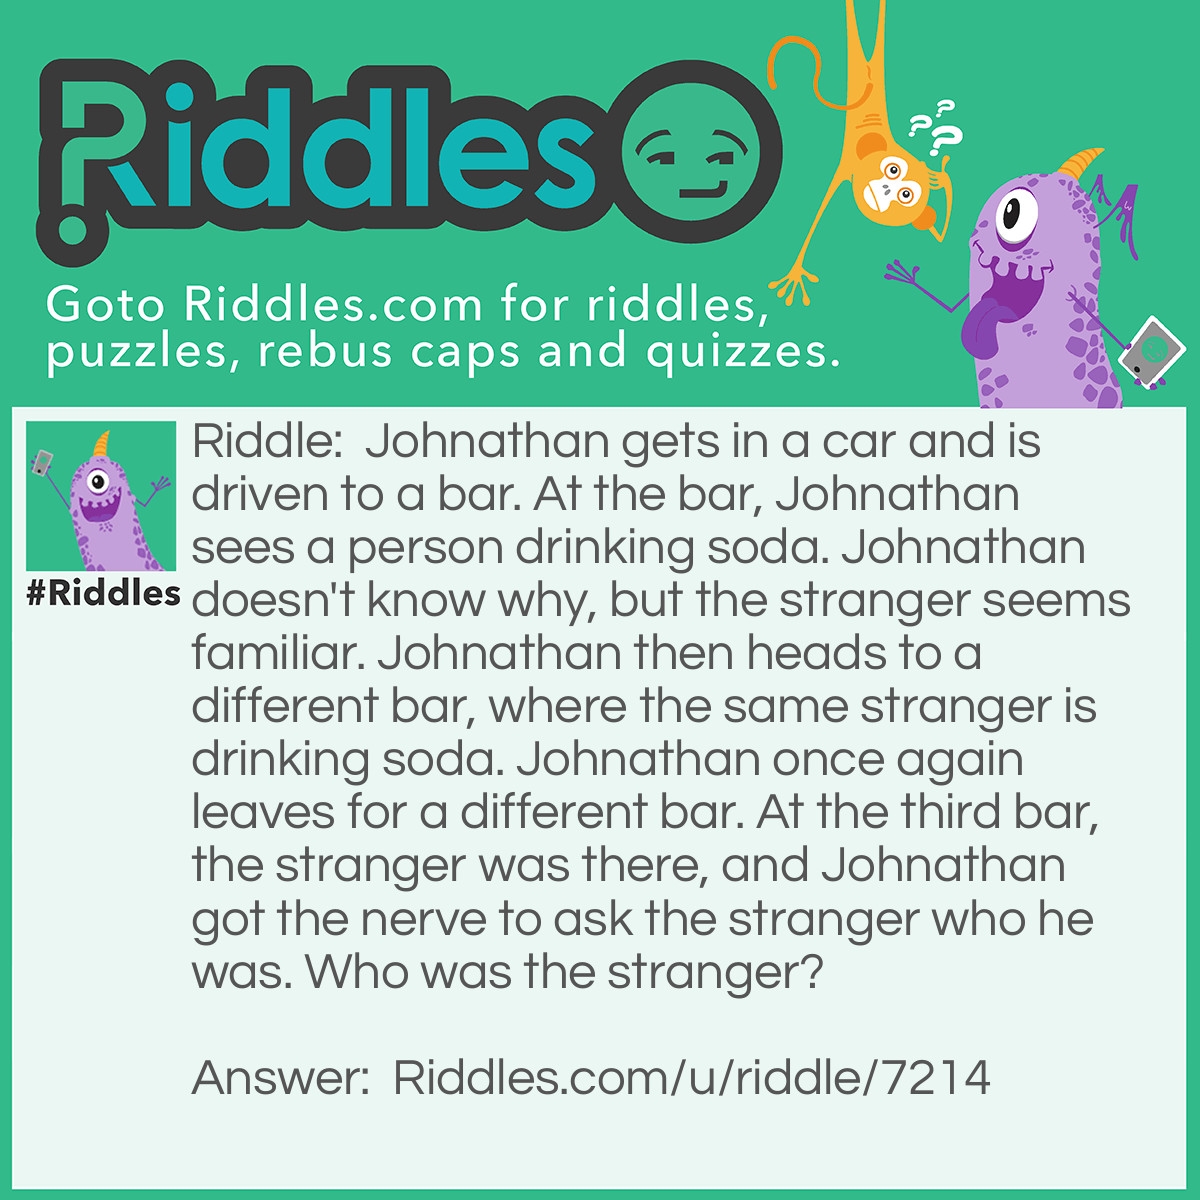 Riddle: Johnathan gets in a car and is driven to a bar. At the bar, Johnathan sees a person drinking soda. Johnathan doesn't know why, but the stranger seems familiar. Johnathan then heads to a different bar, where the same stranger is drinking soda. Johnathan once again leaves for a different bar. At the third bar, the stranger was there, and Johnathan got the nerve to ask the stranger who he was. Who was the stranger? Answer: The taxi driver that drove Johnathan to the bar!